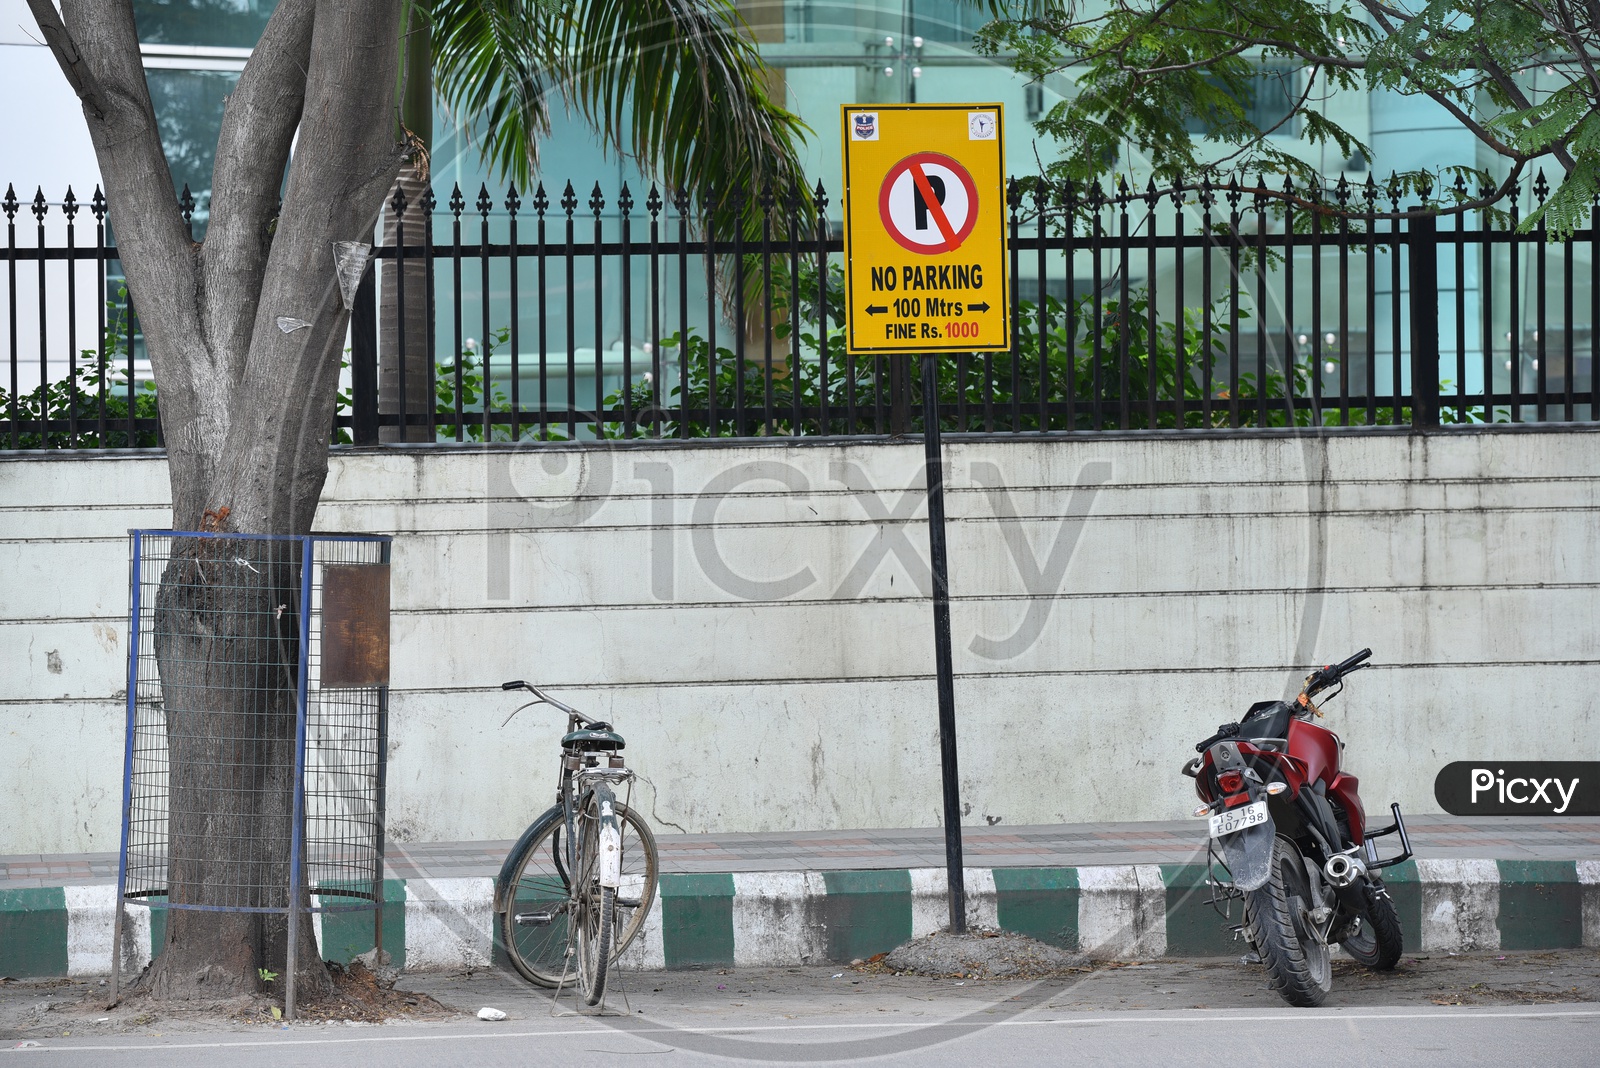 Vehicles Parking at No Parking Zone in Hyderabad